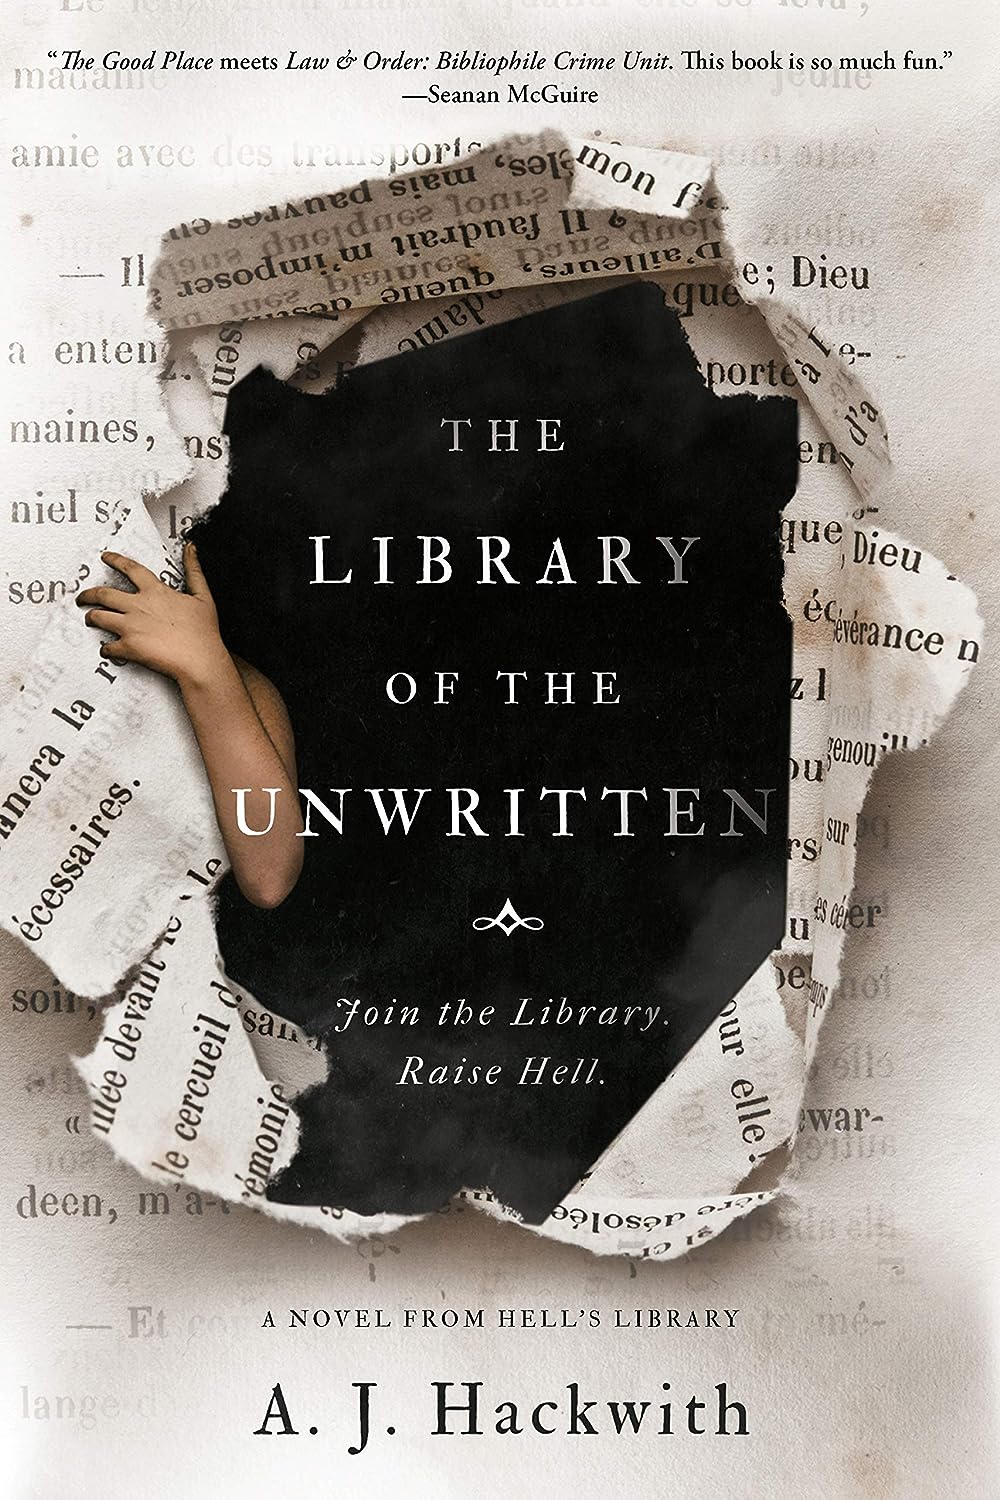 The Library of the Unwritten (Novel from Hell's Library #1) - by A. J. Hackwith